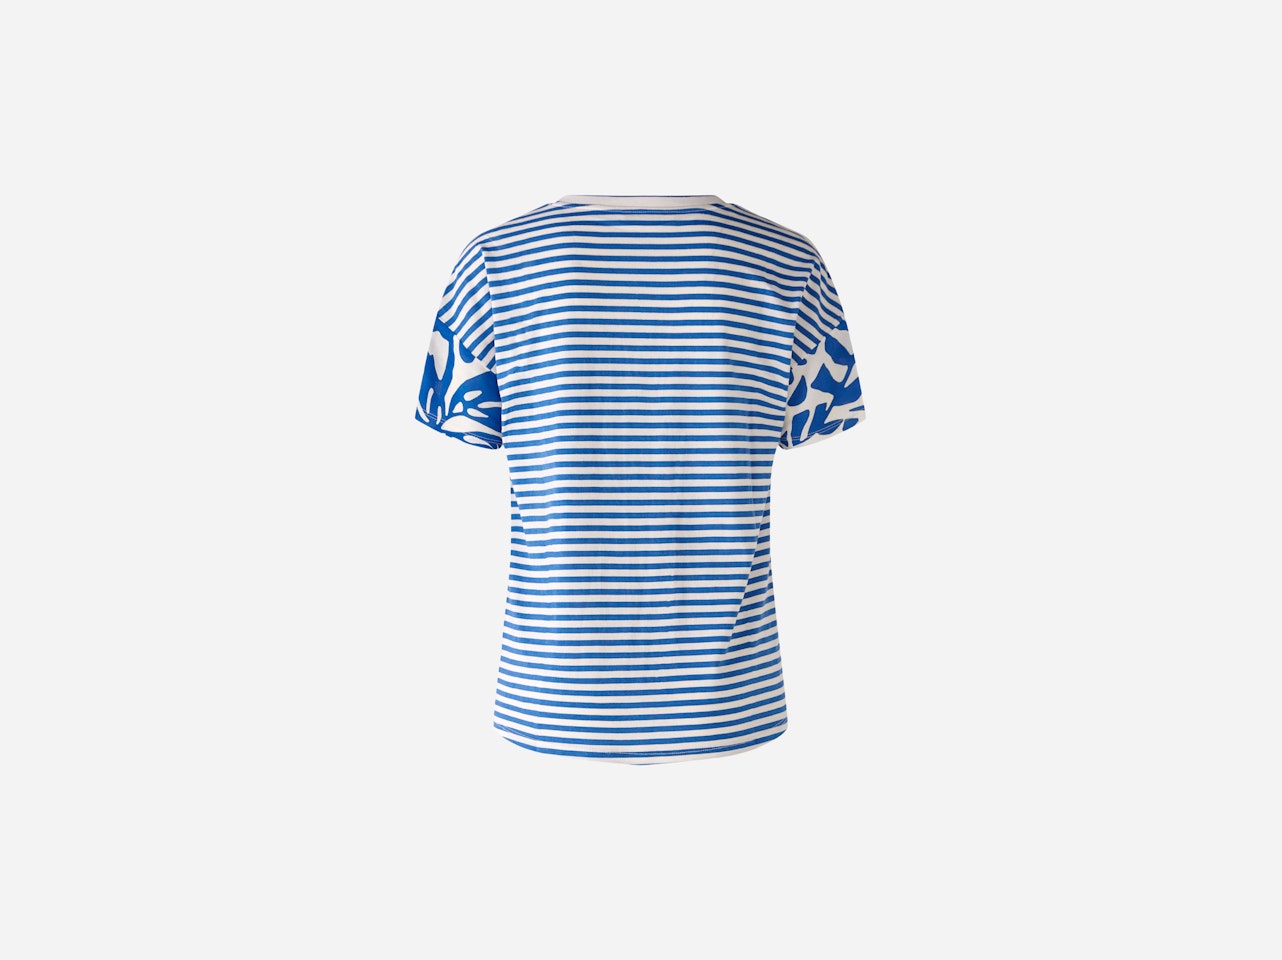 Bild 7 von Blouse shirt woven patch with stripes on the back in blue white | Oui